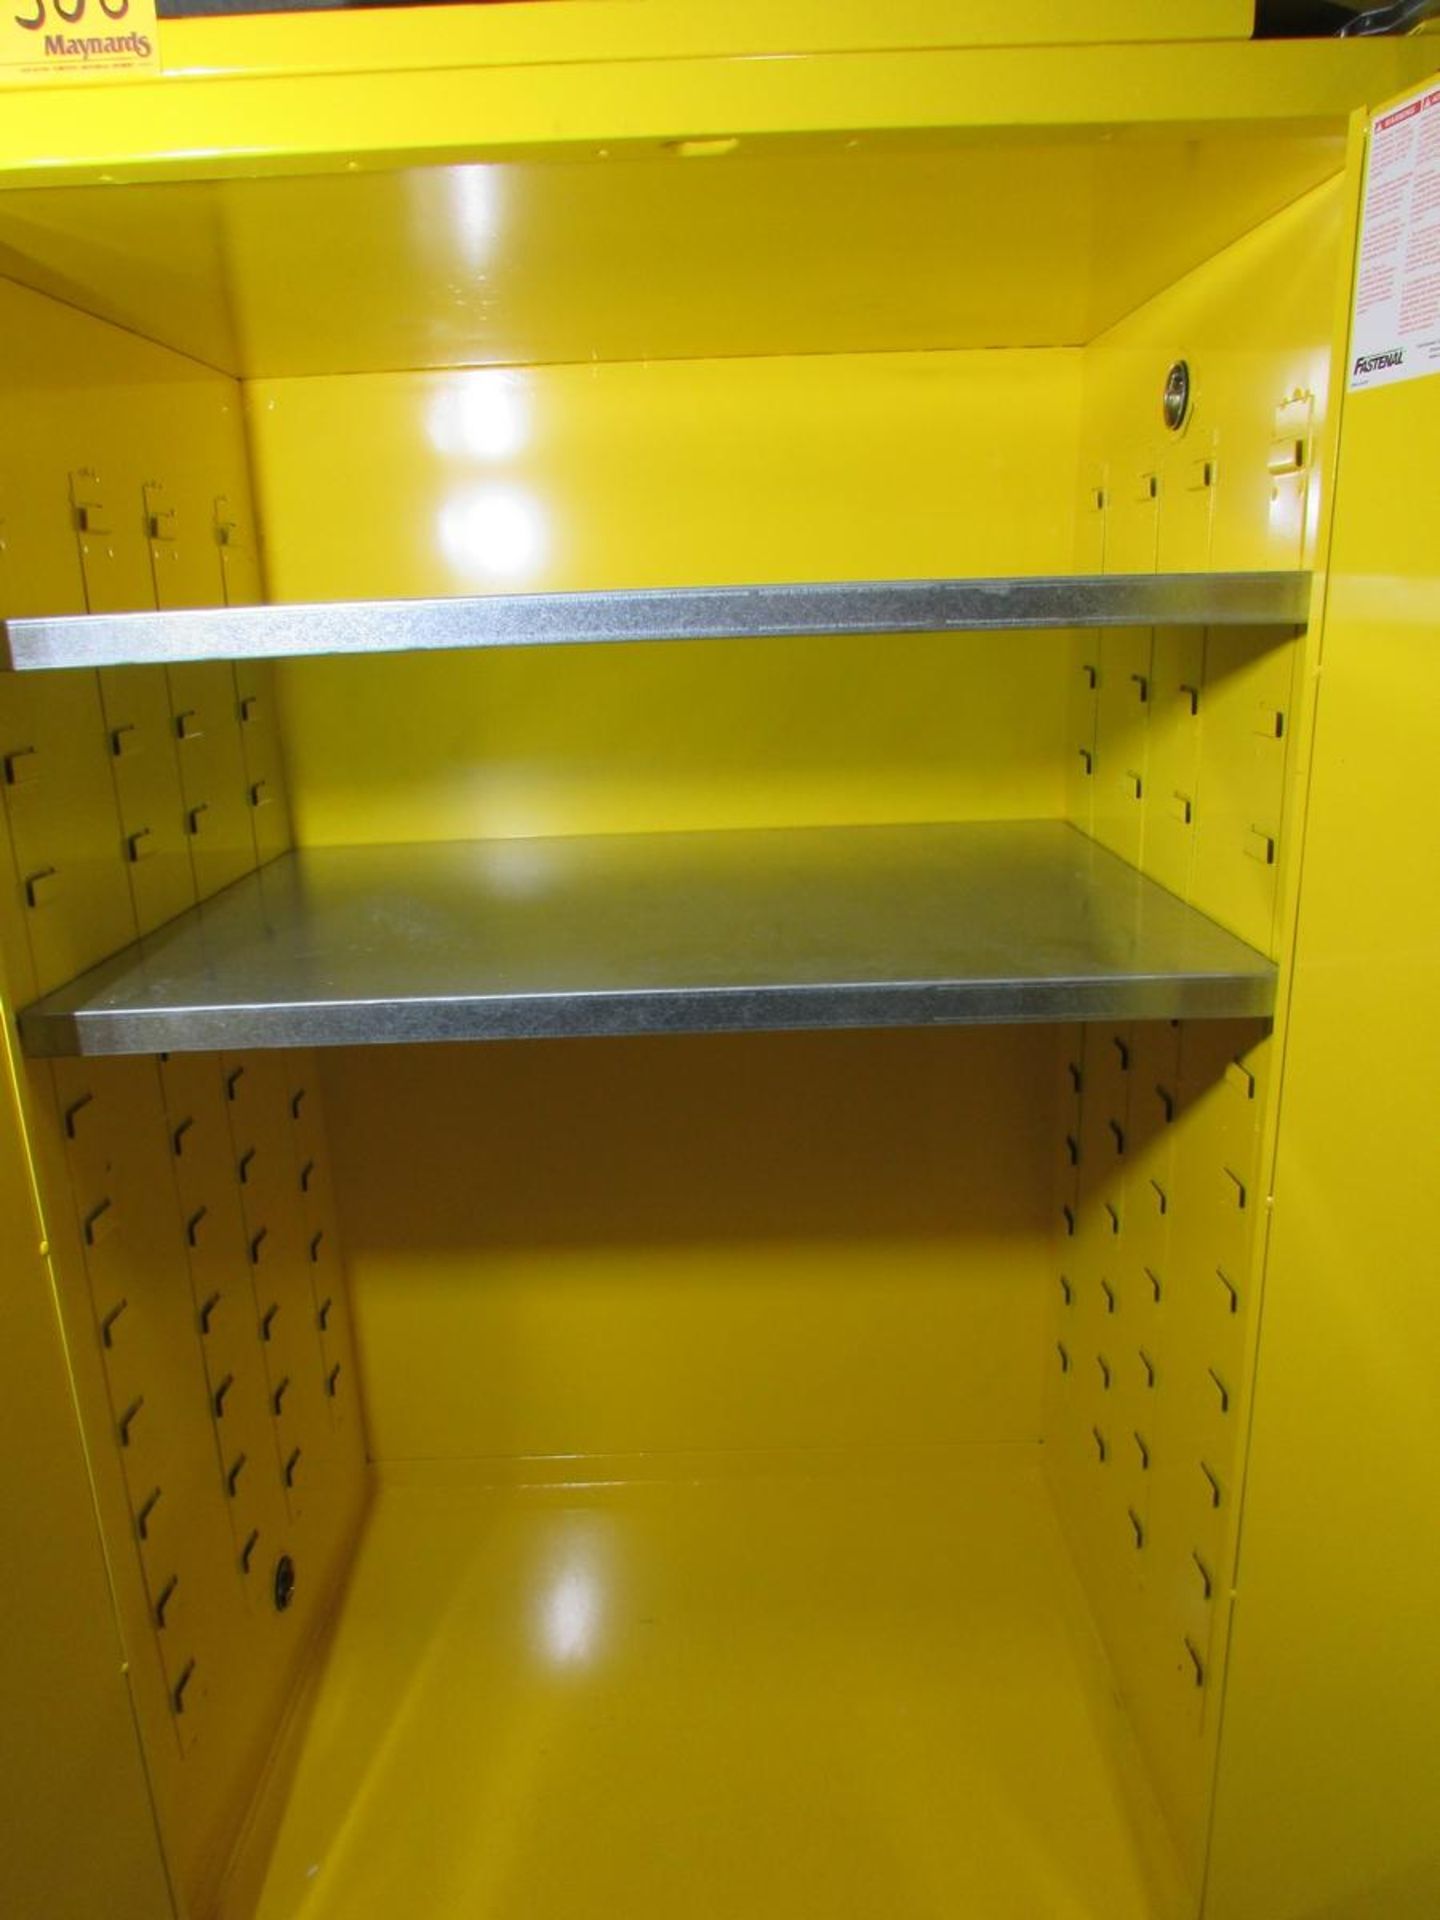 Agent 1068349 90 Gal. Flammable Liquid Storage Cabinet - Image 2 of 2